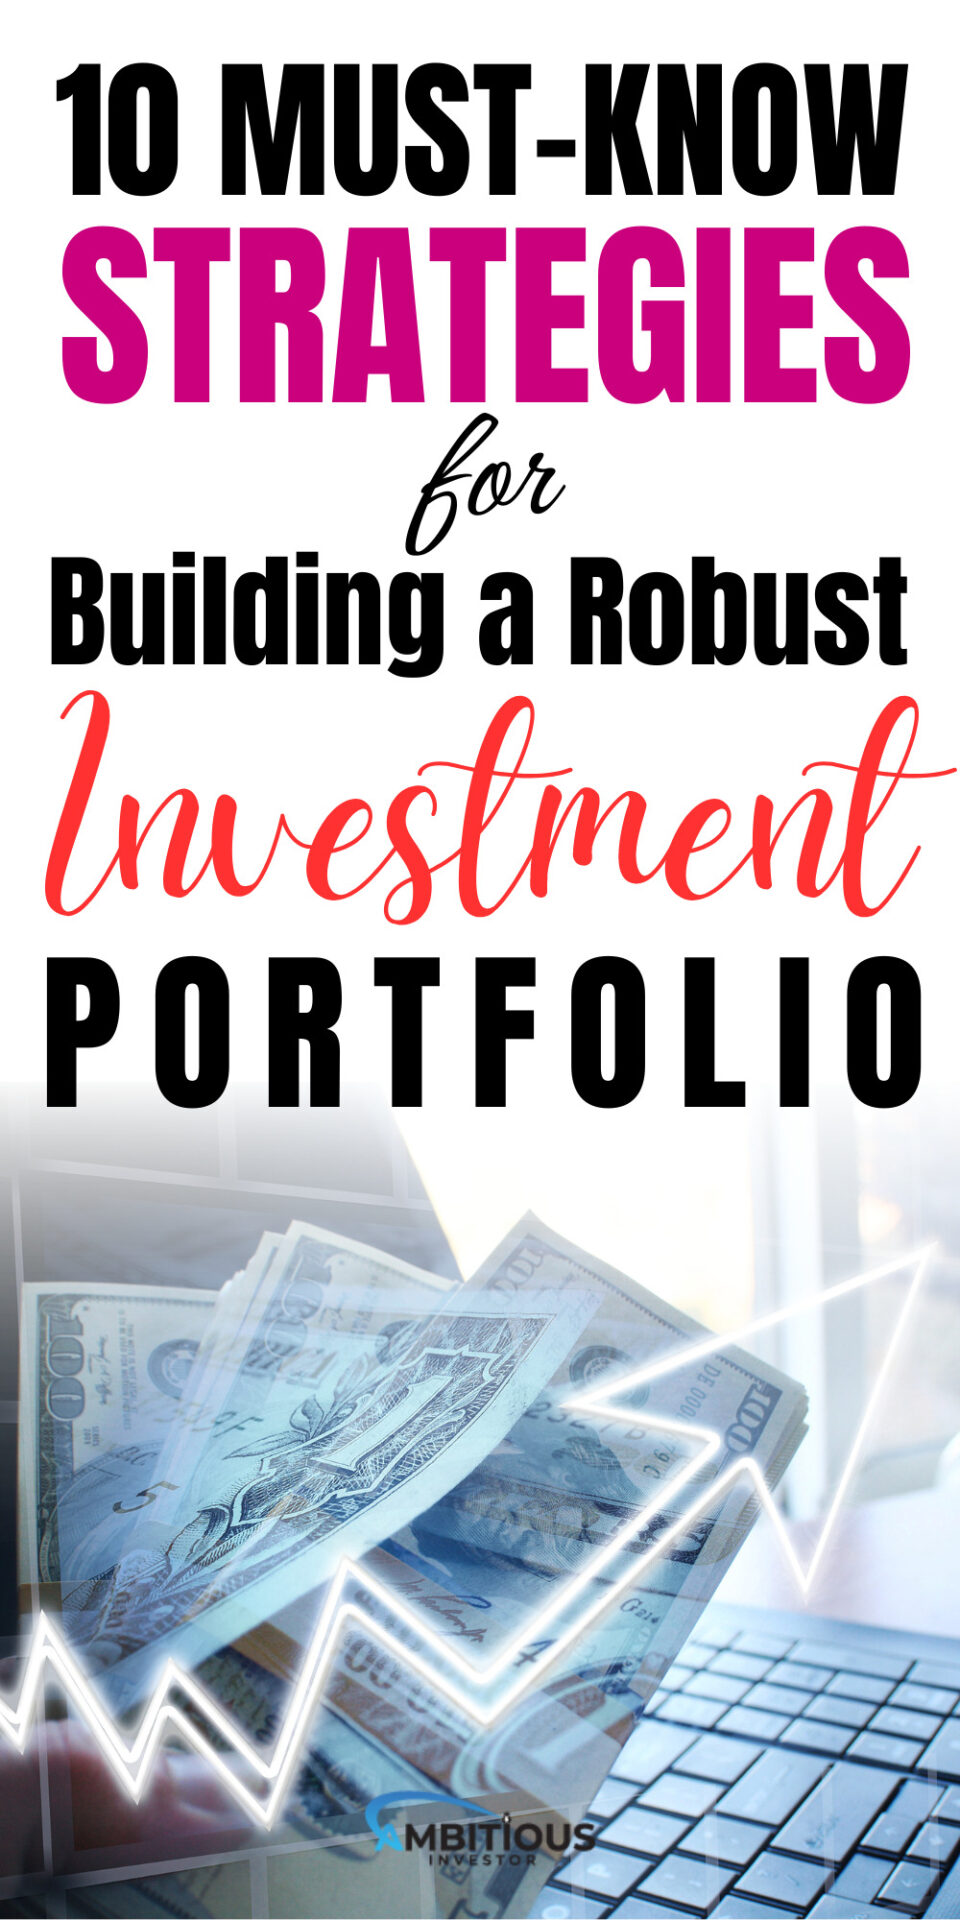 10 Must-Know Strategies for Building a Robust Investment Portfolio